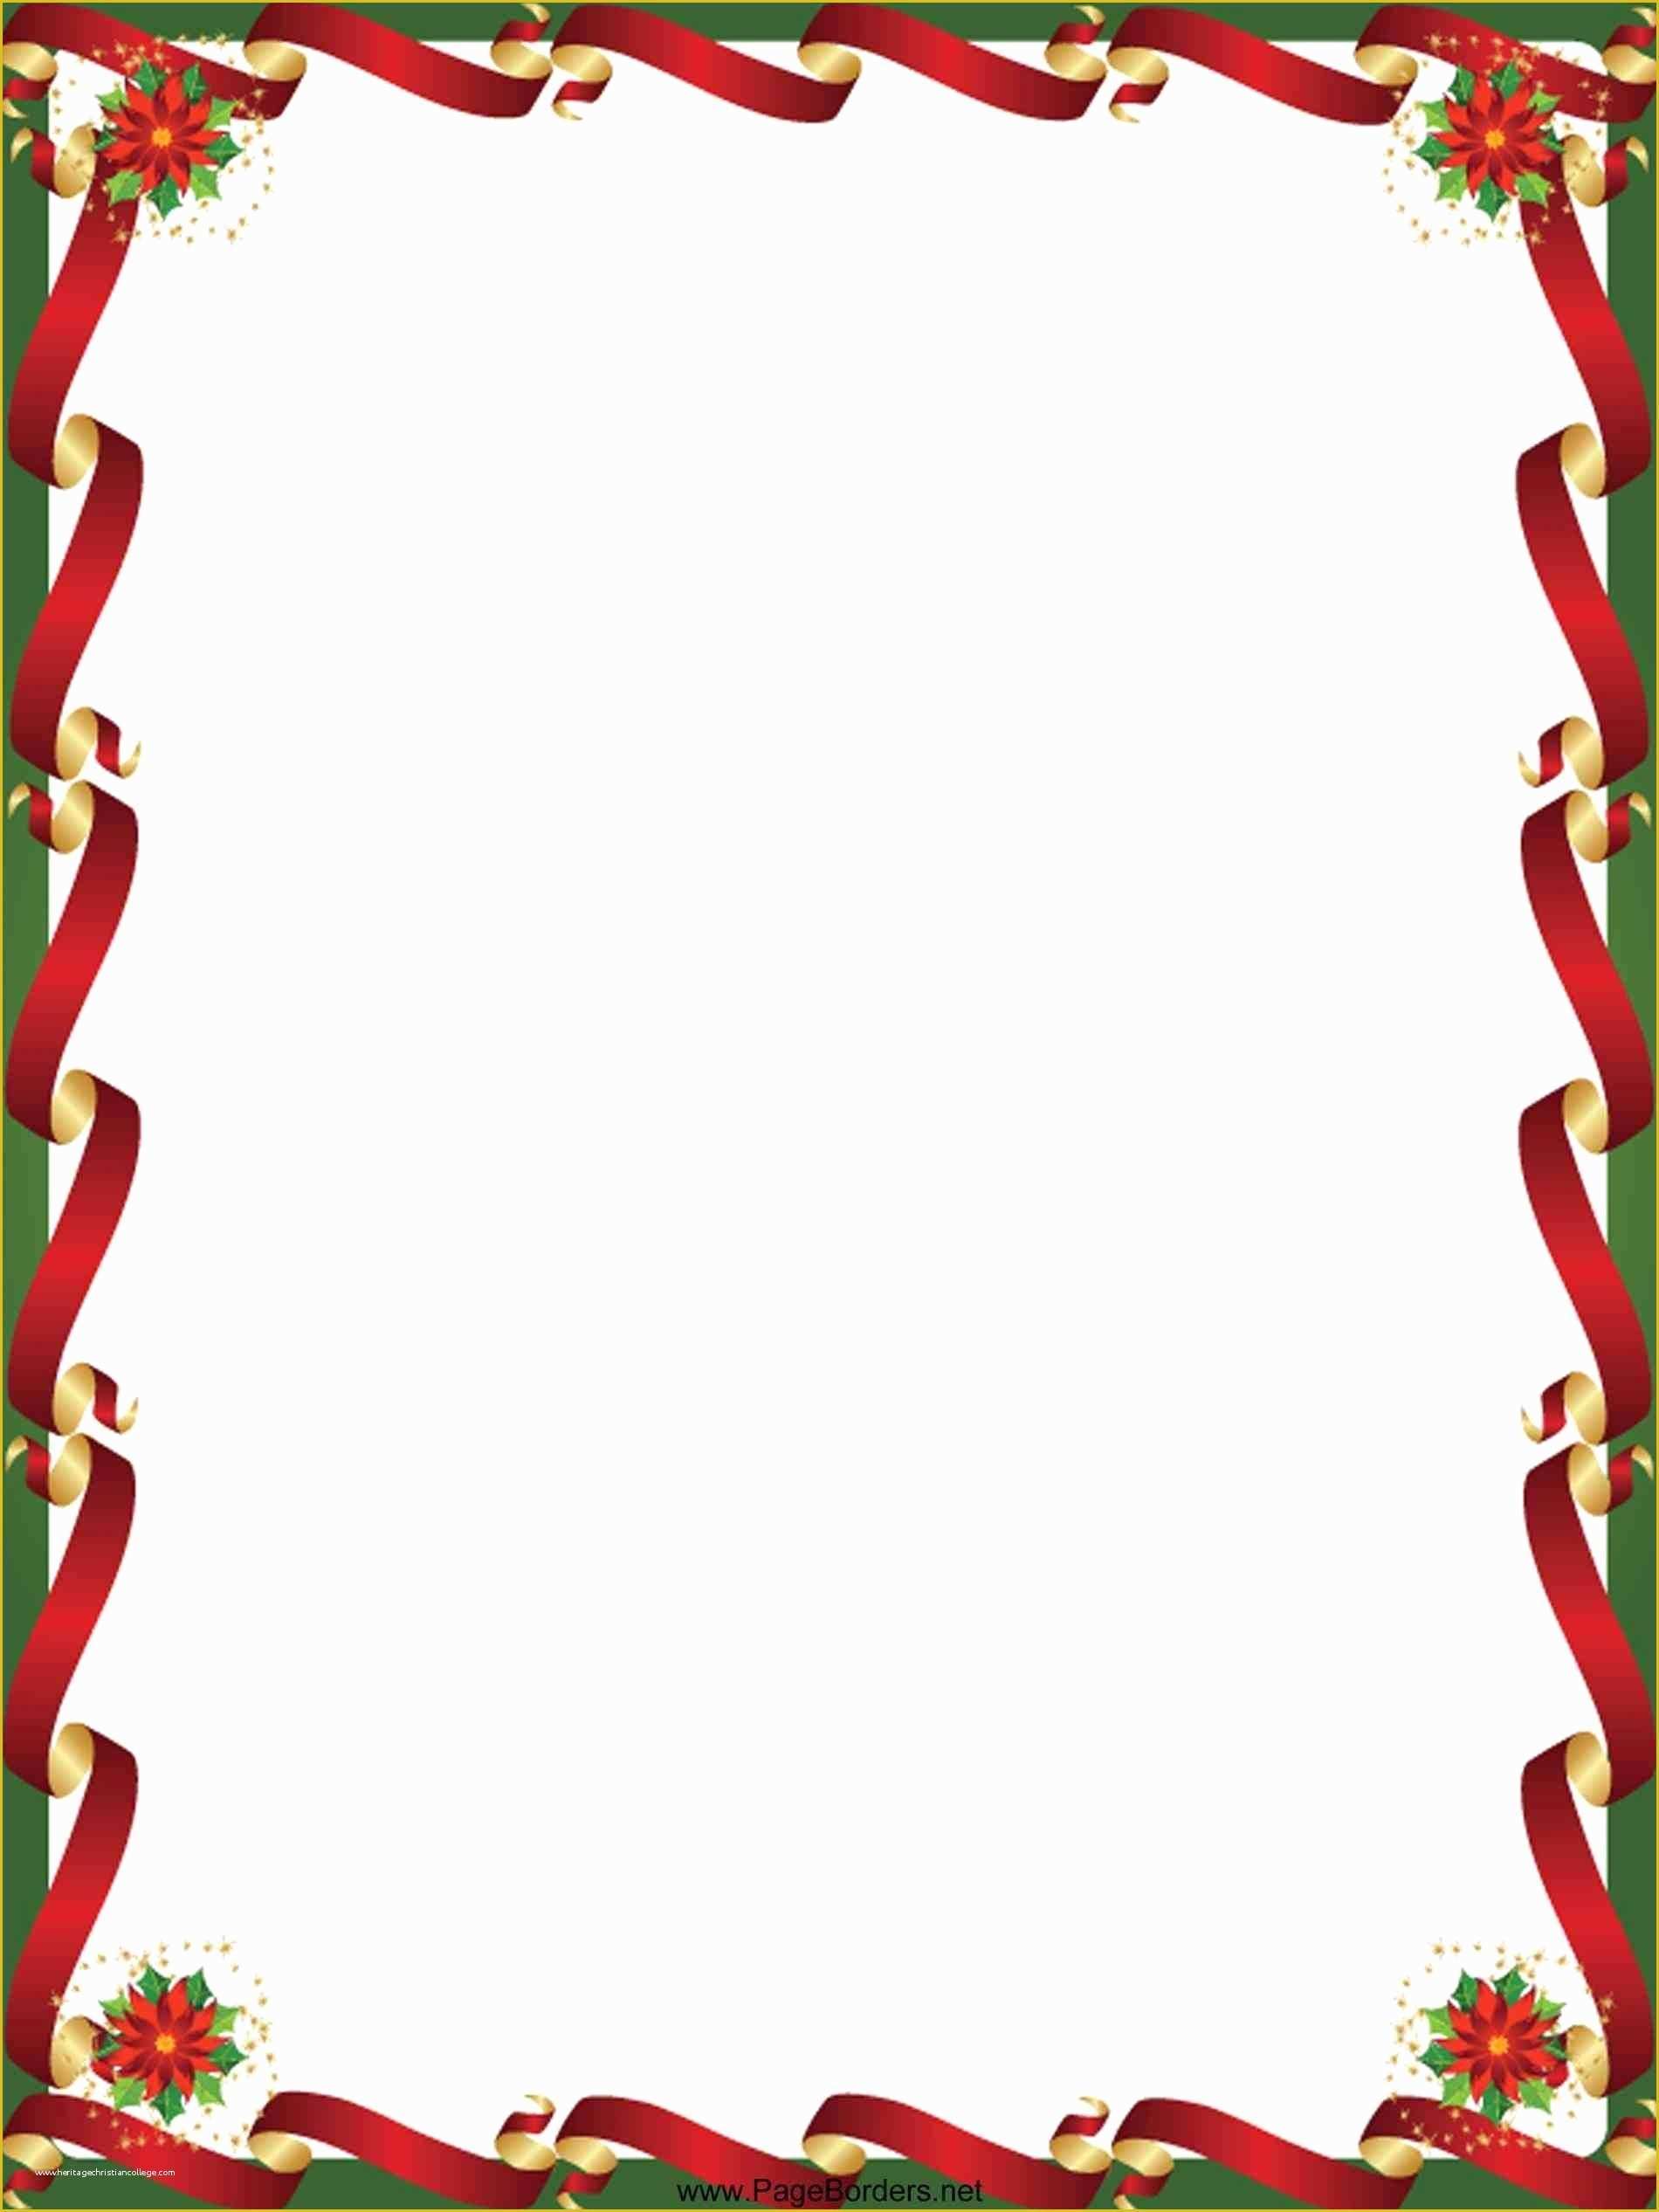 Christmas Border Templates Free Download Of Christmas Border Templates Free